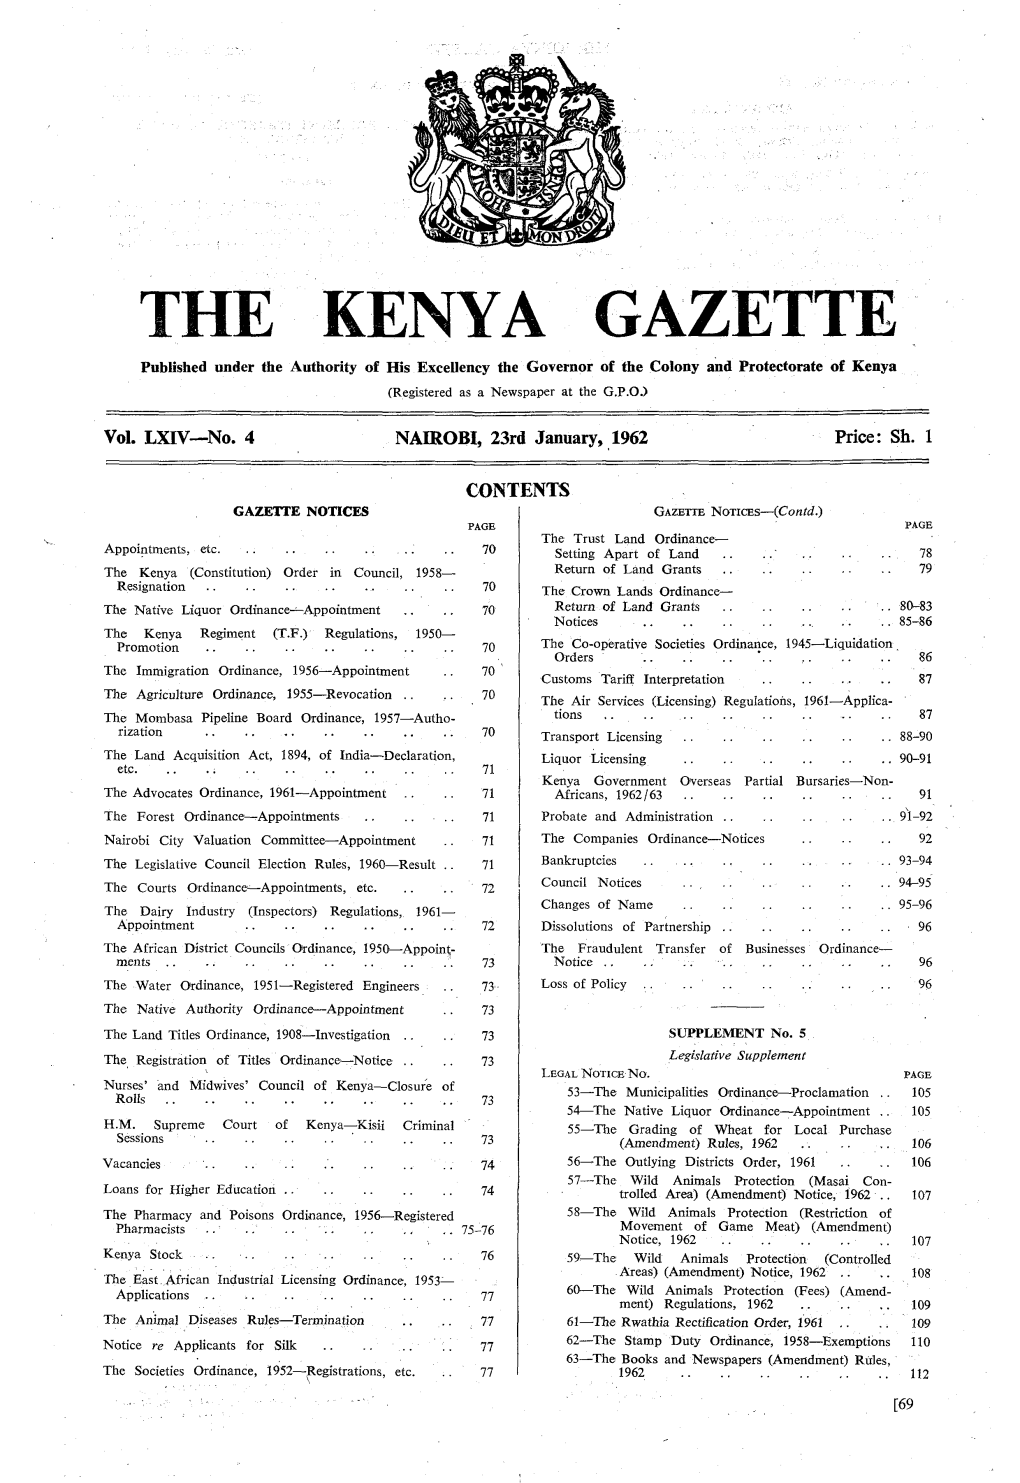 THE KENYA GAZETTE Published Under the Authority of His Excellency the Governor of the Colony and Protectorate of Kenya (Registered As a Newspaper at the G.P.03